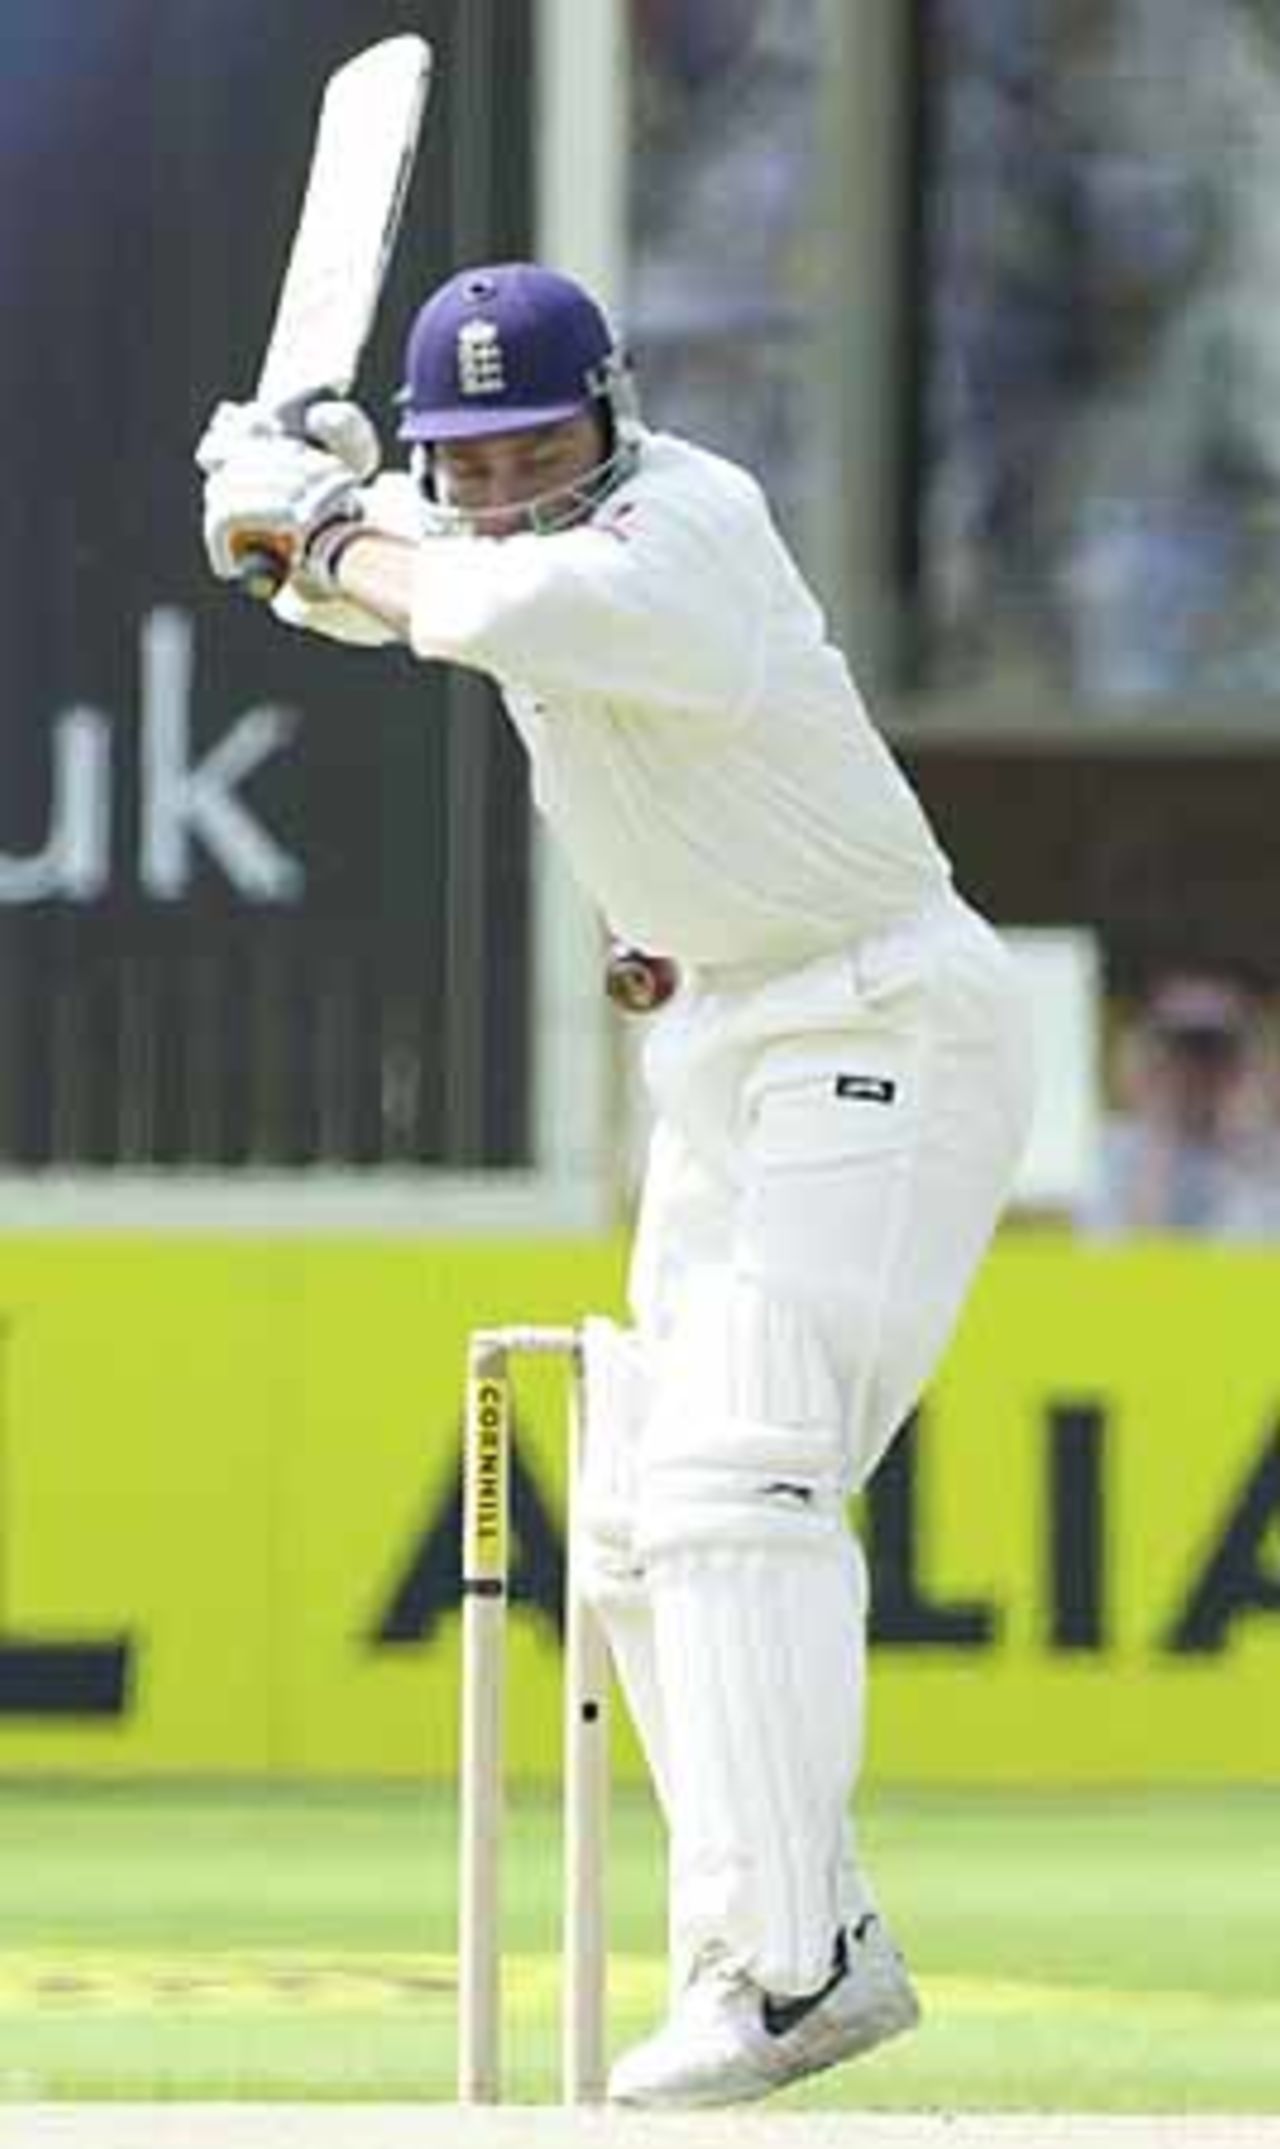 Pictured in the 2000 Test Series v England, 1st Test at Birmingham